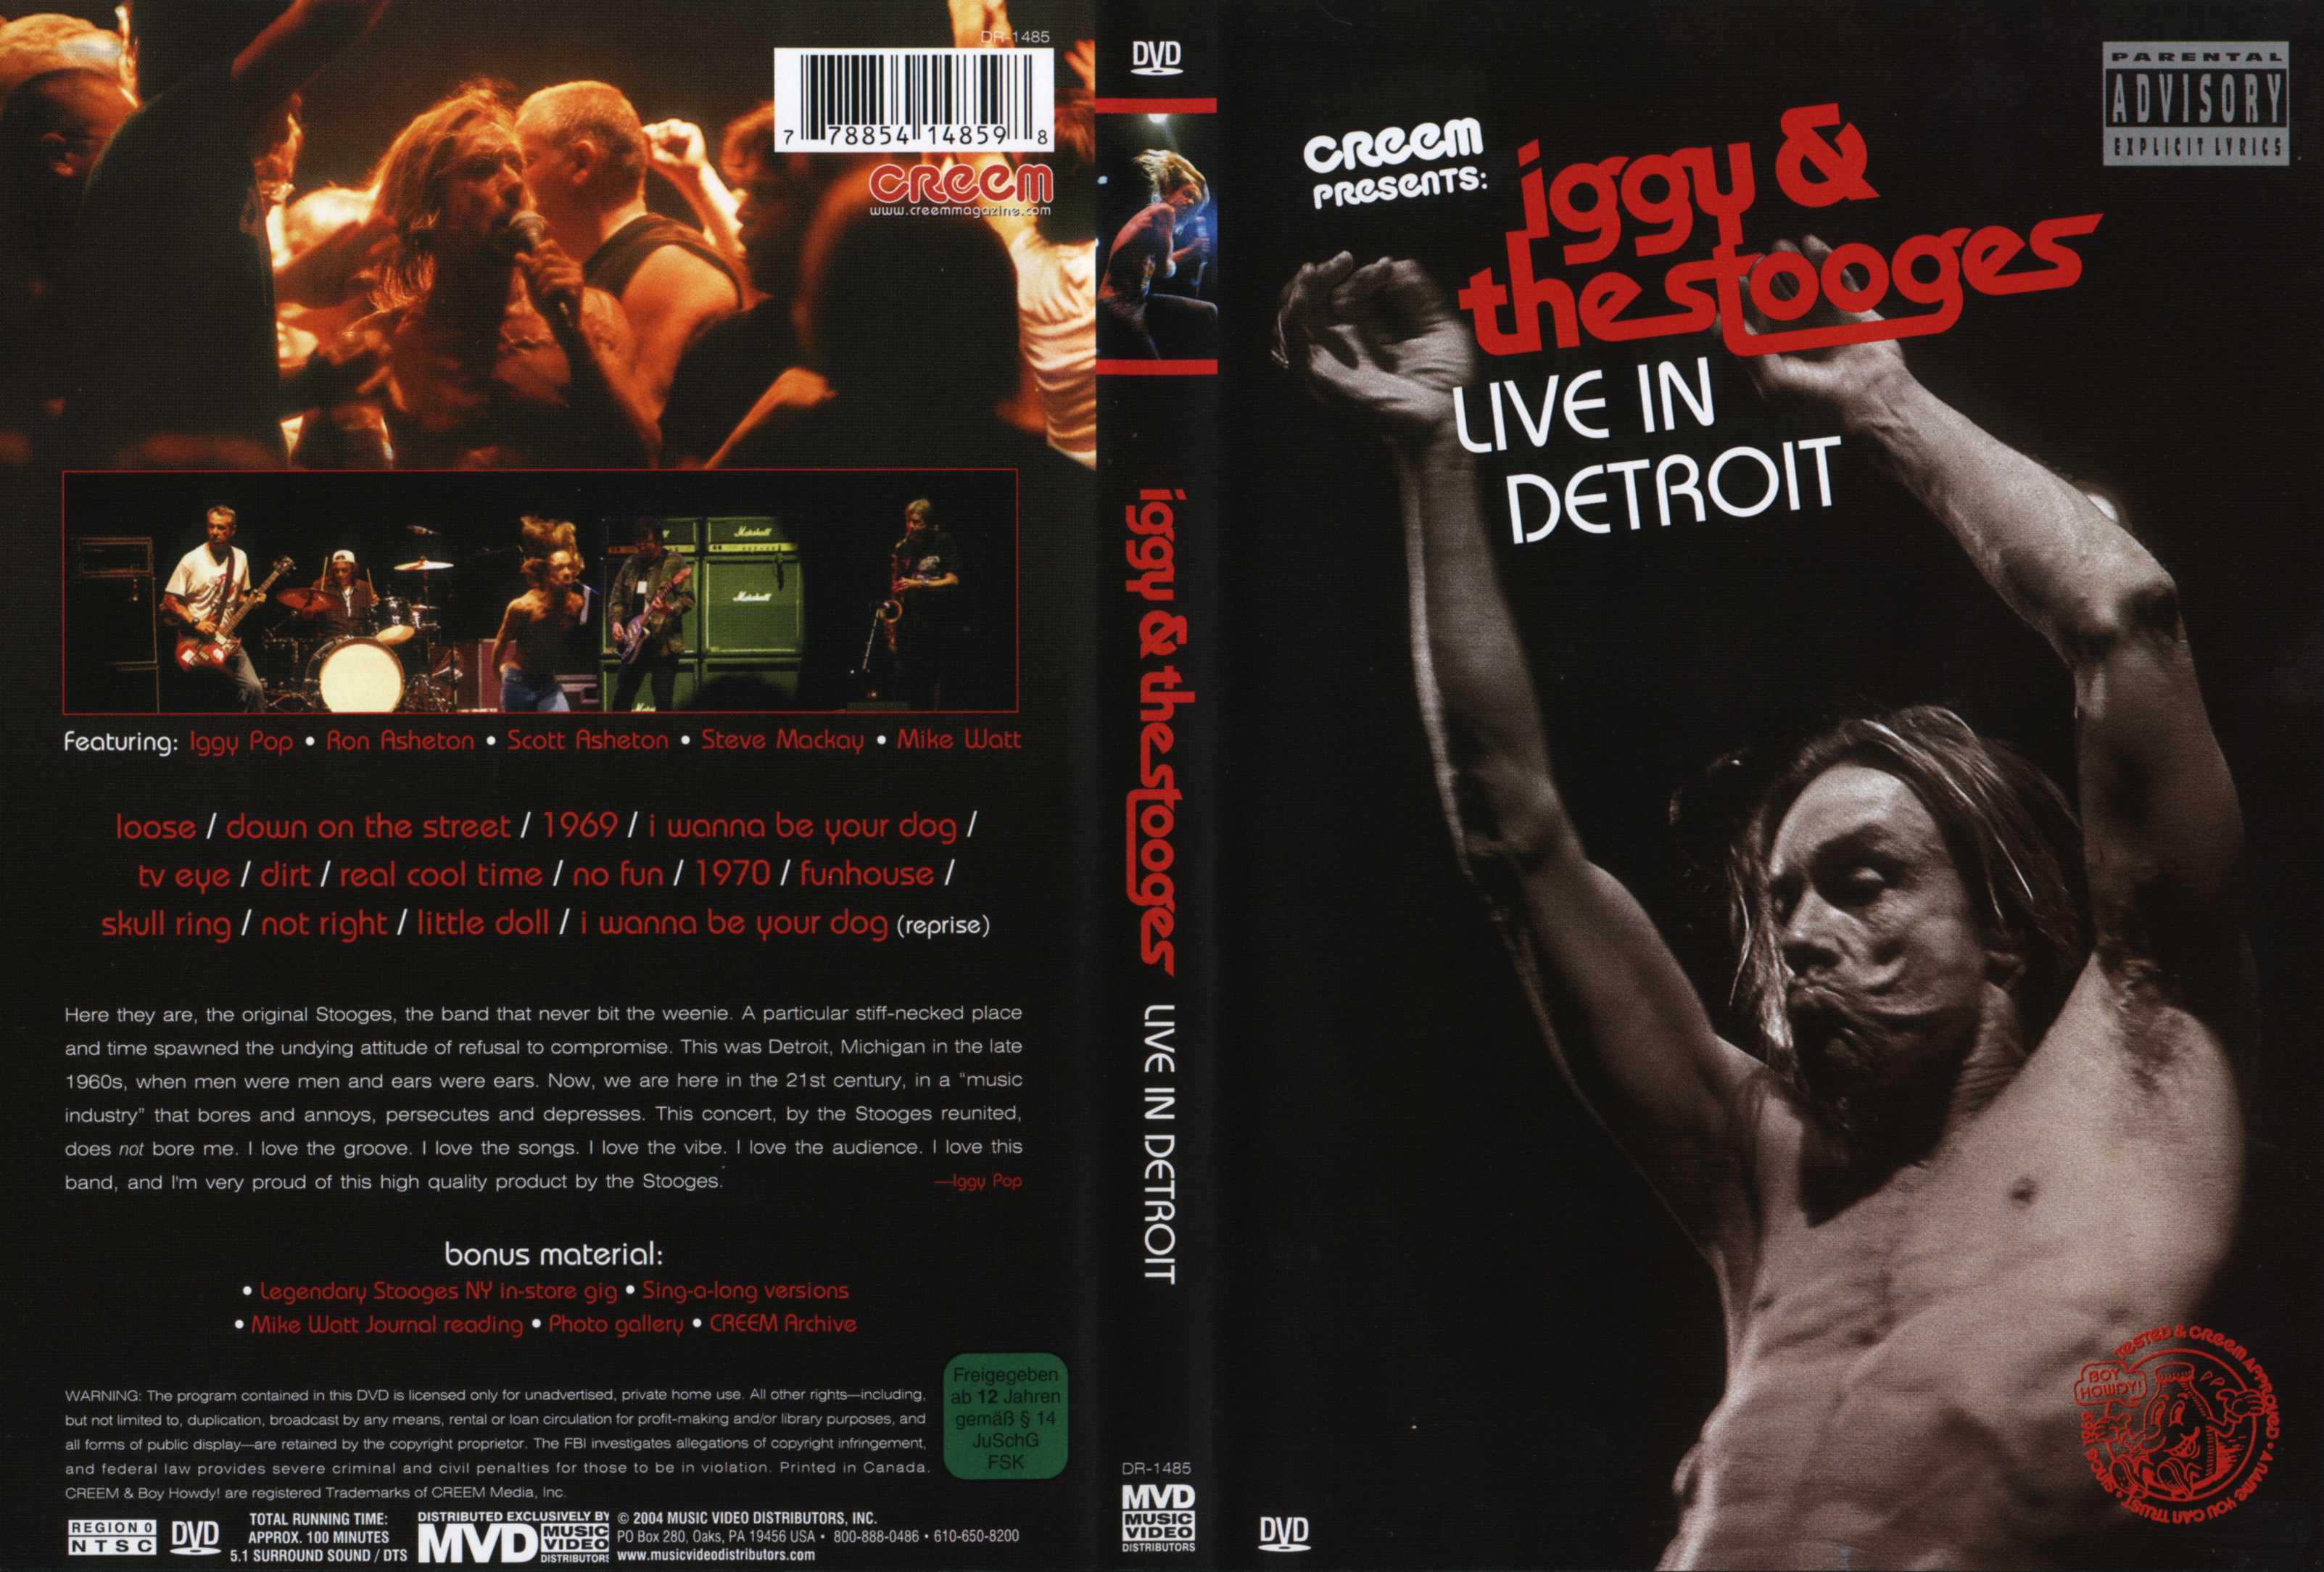 Jaquette DVD Iggy and the stooges live in detroit